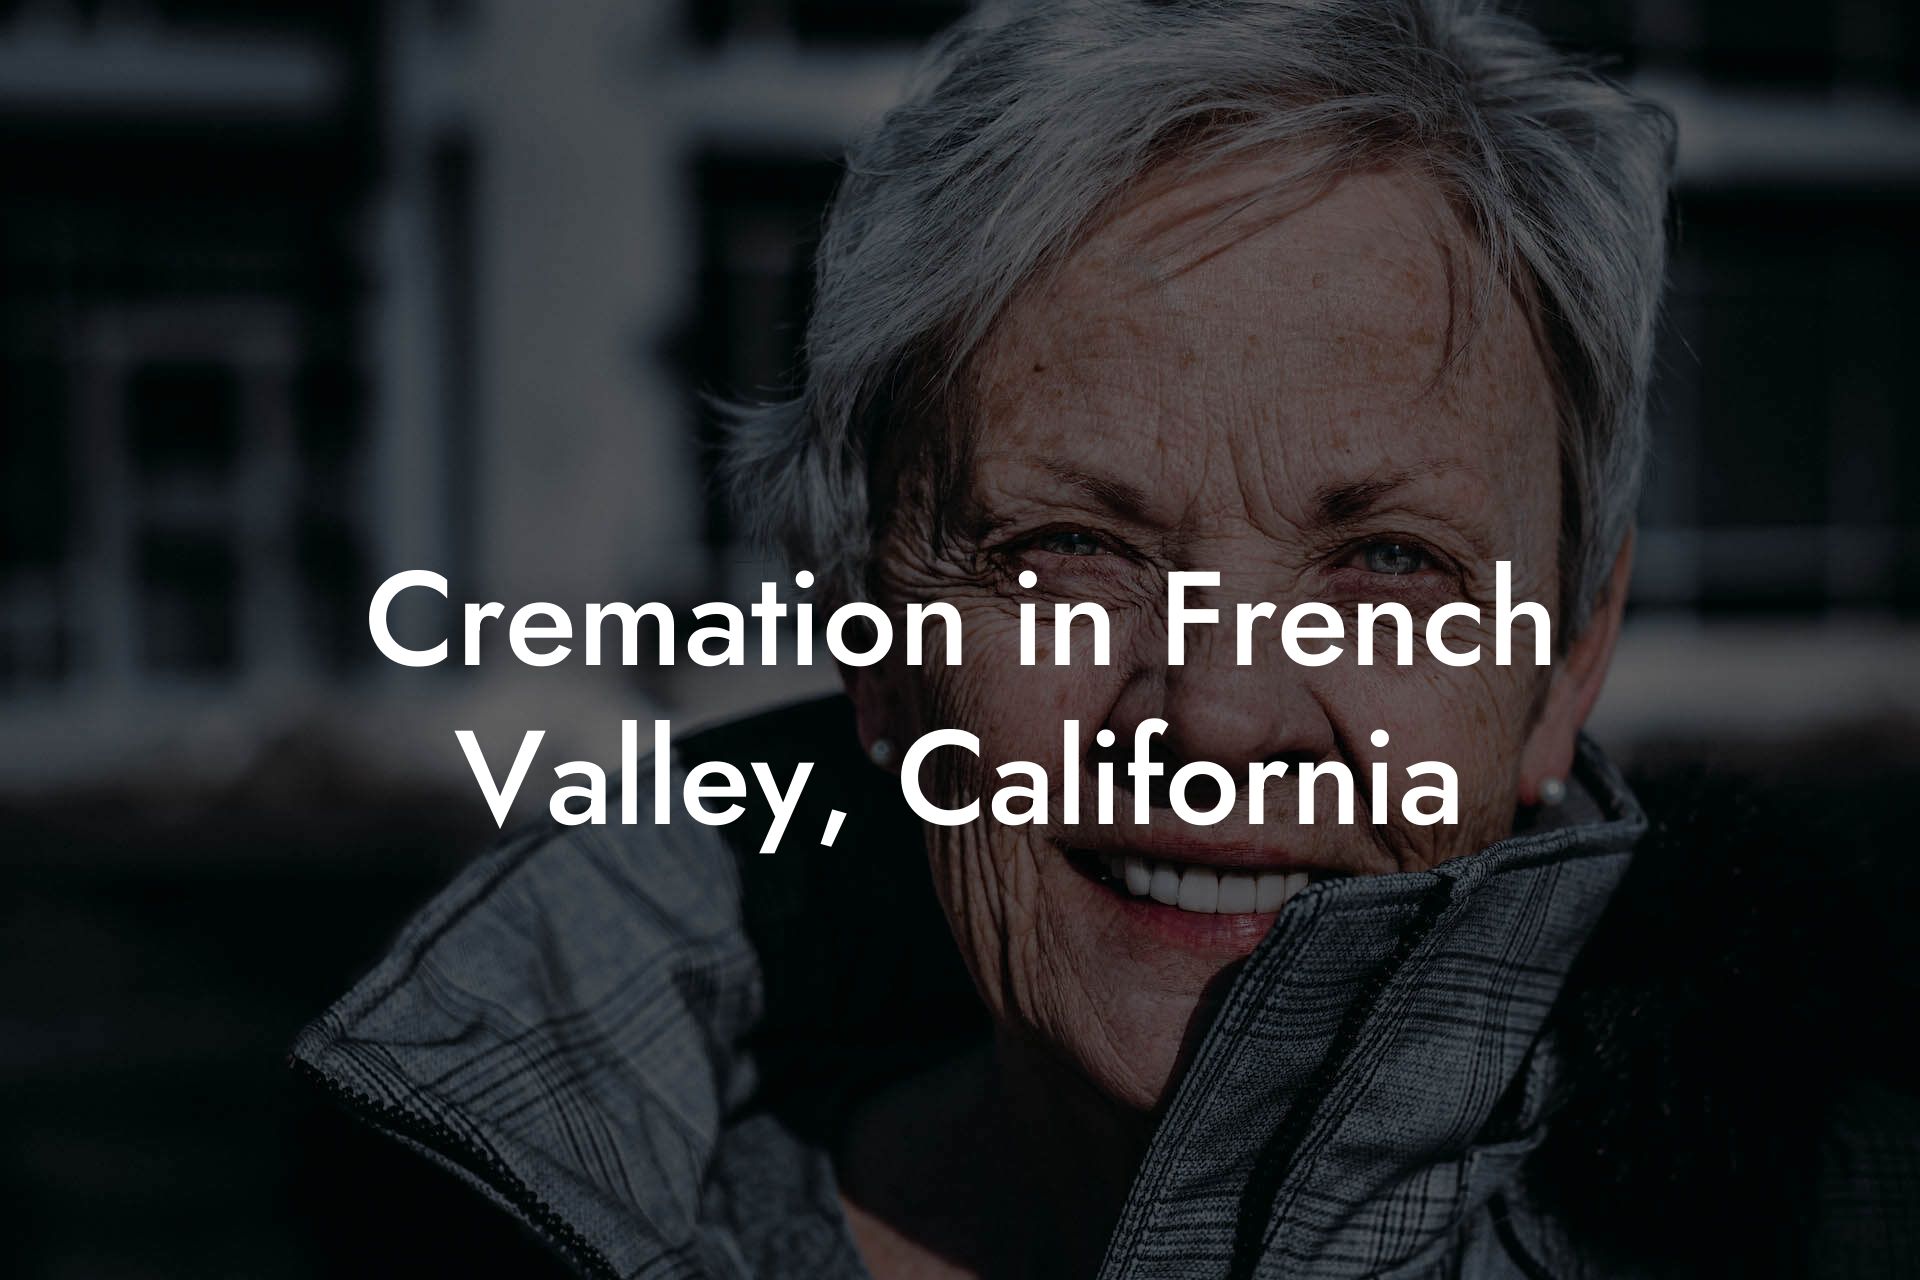 Cremation in French Valley, California